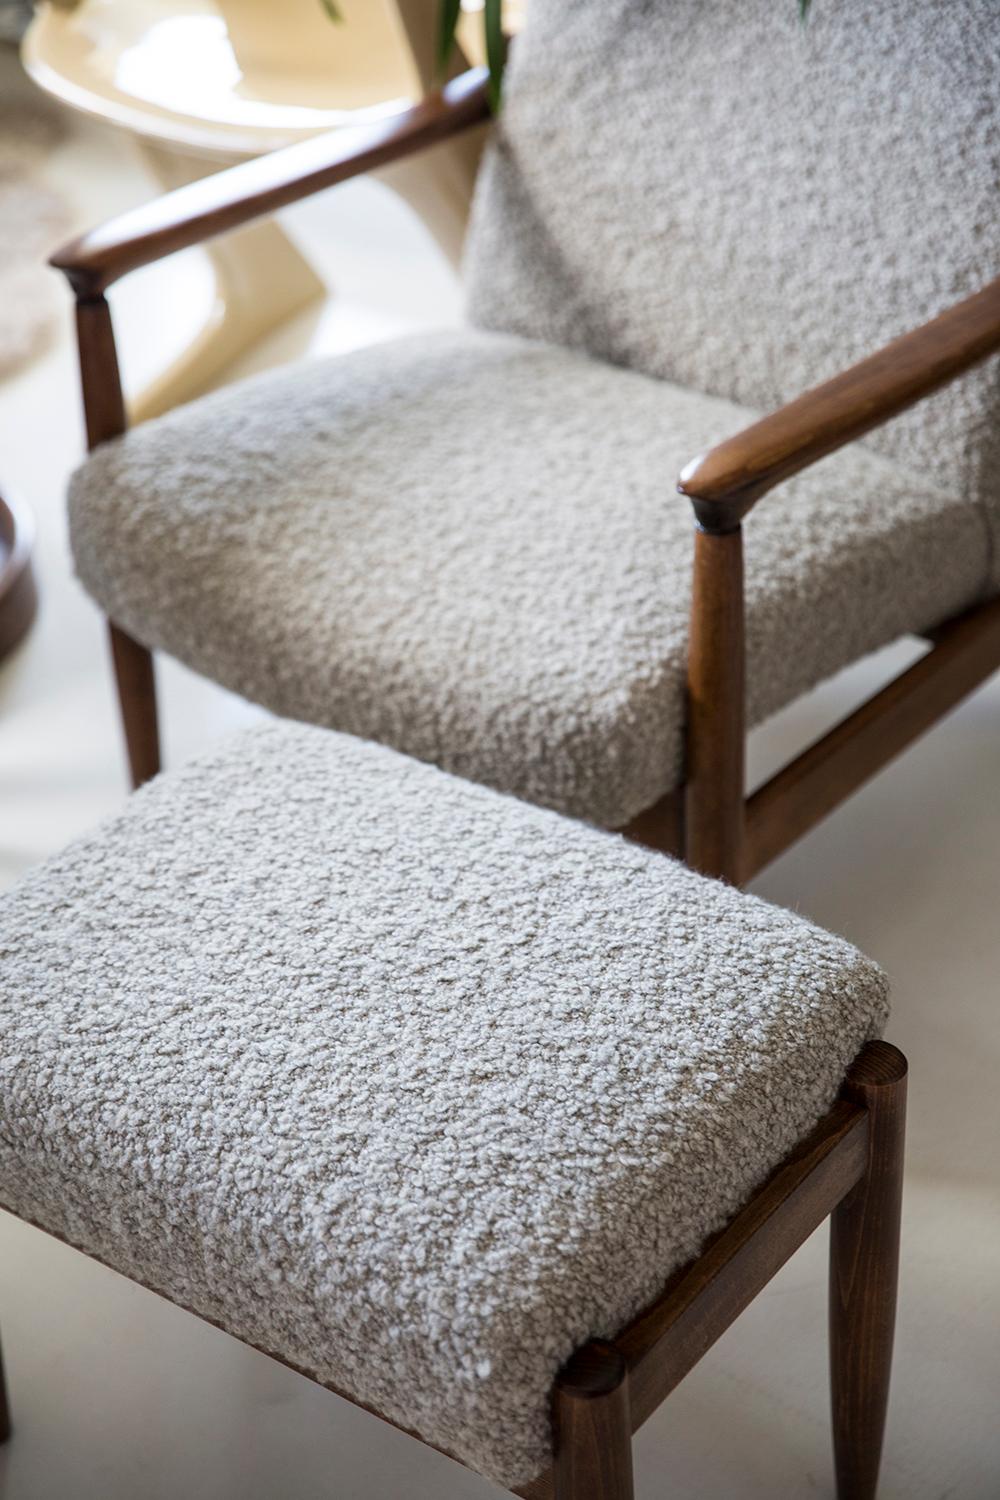 Unique alpaca wool stool, designed by Edmund Homa. The stool was made in the 1960s in the Gosciecinska Furniture Factory from solid beechwood. The GFM type stool is regarded one of the best Polish stools design from the previous age. The stool have